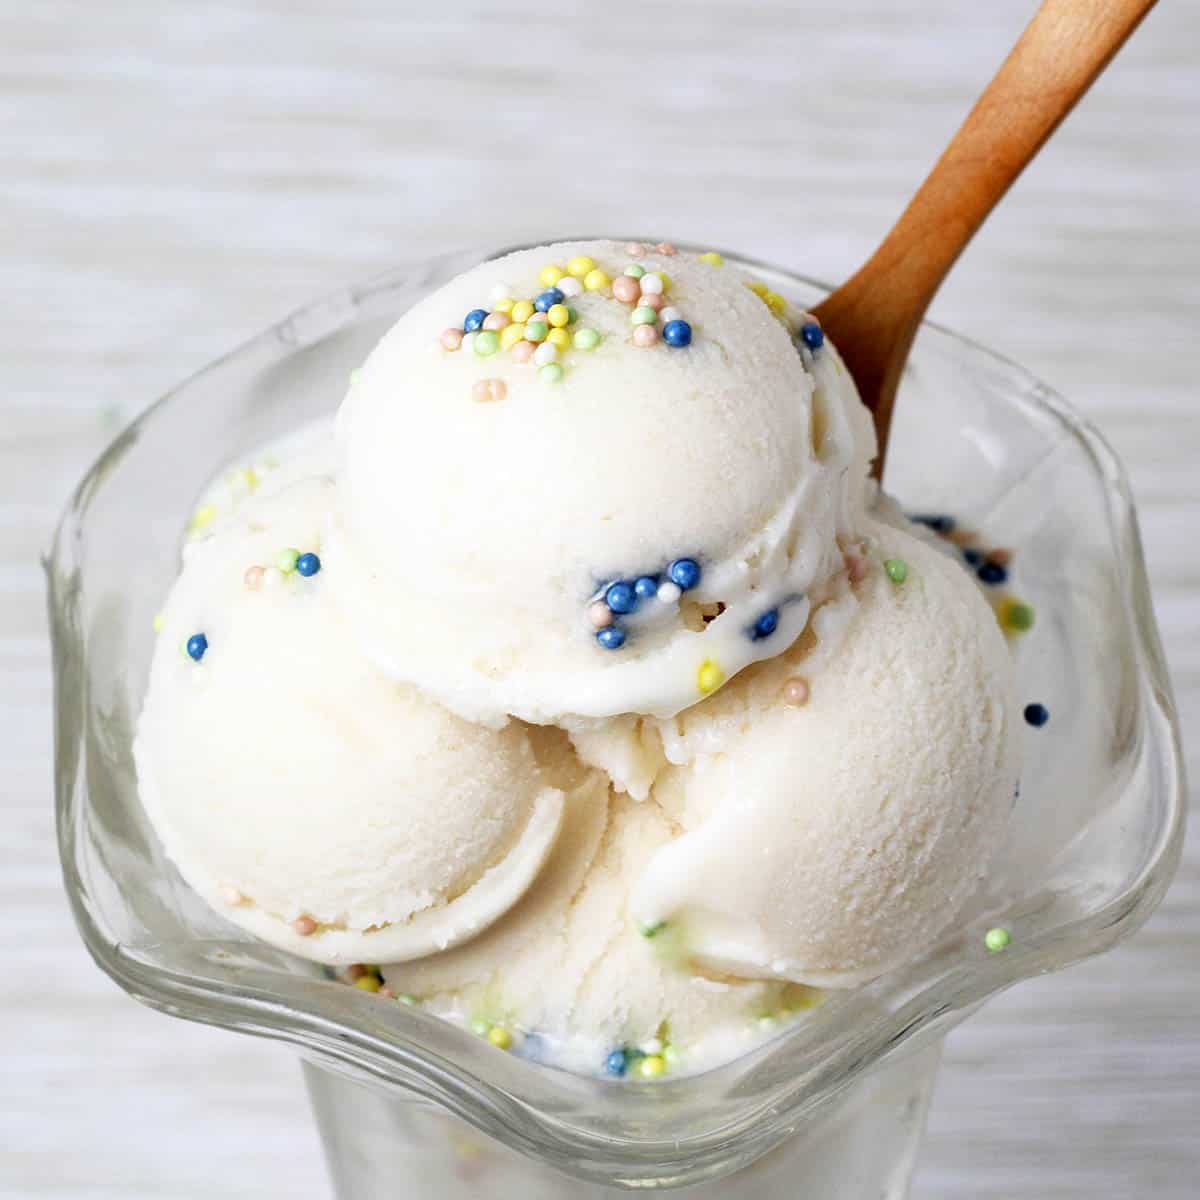 ice cream dish with vanilla looking (cake batter flavored) protein ice cream in rounded scoops, topped with nonpareil sprinkles and with a wooden dessert spoon